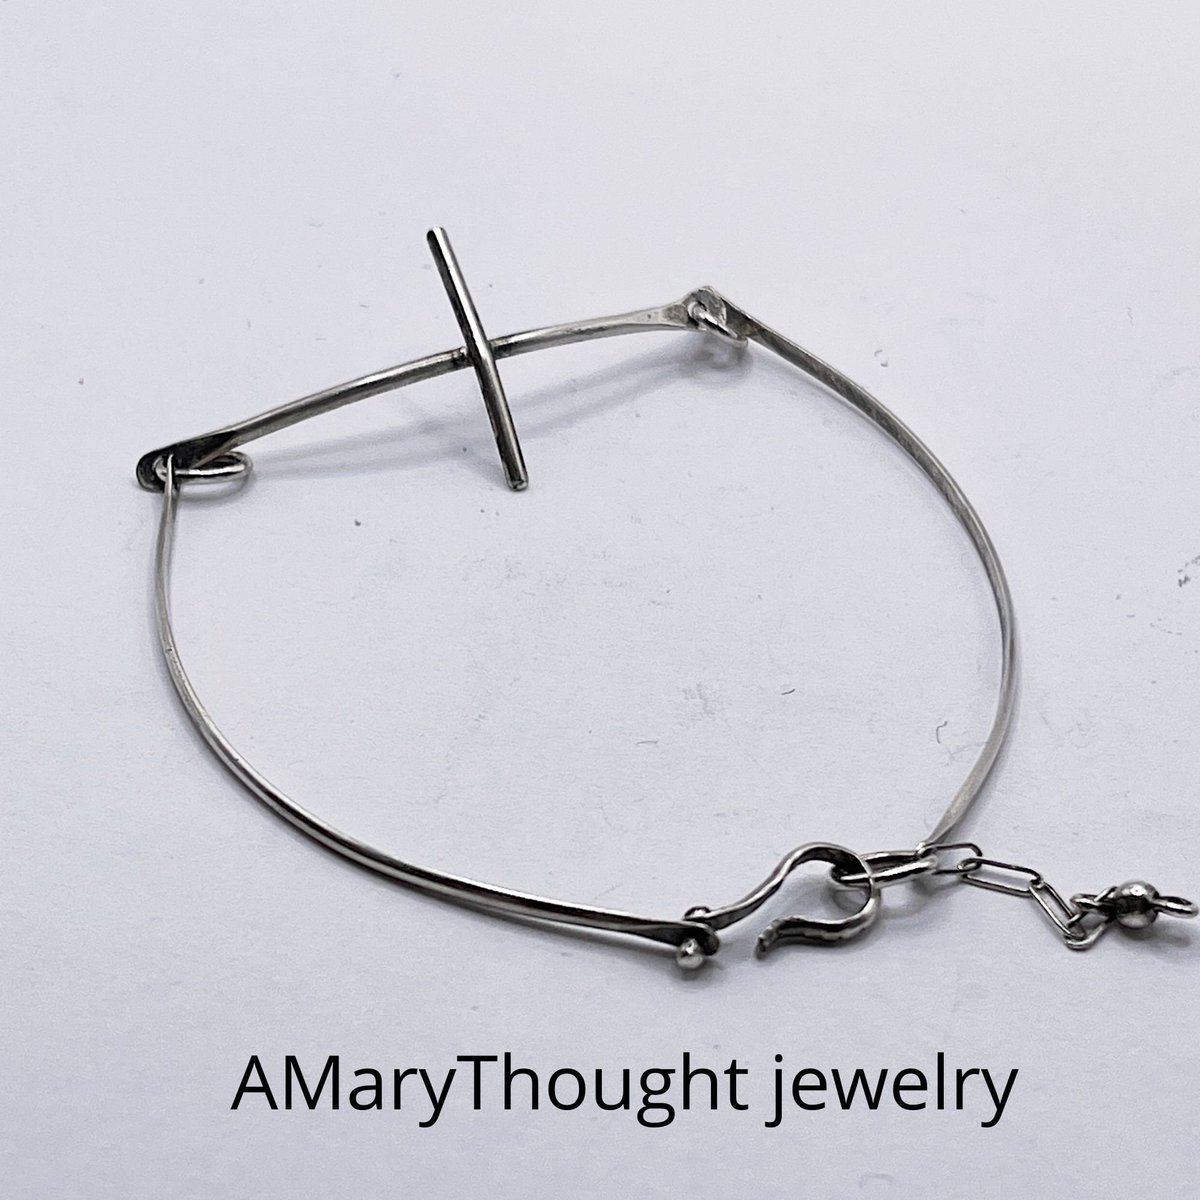 Excited to share the latest addition to my #etsy shop: Sterling Silver Sideways Cross Bracelet, Artisan Handmade Jewelry, A Spiritual Gift For The Girl Who Enjoys Minimalism etsy.me/3O8WUXk #silver #confirmation #easter #yes #no #men #sidewayscross #sterlingsil